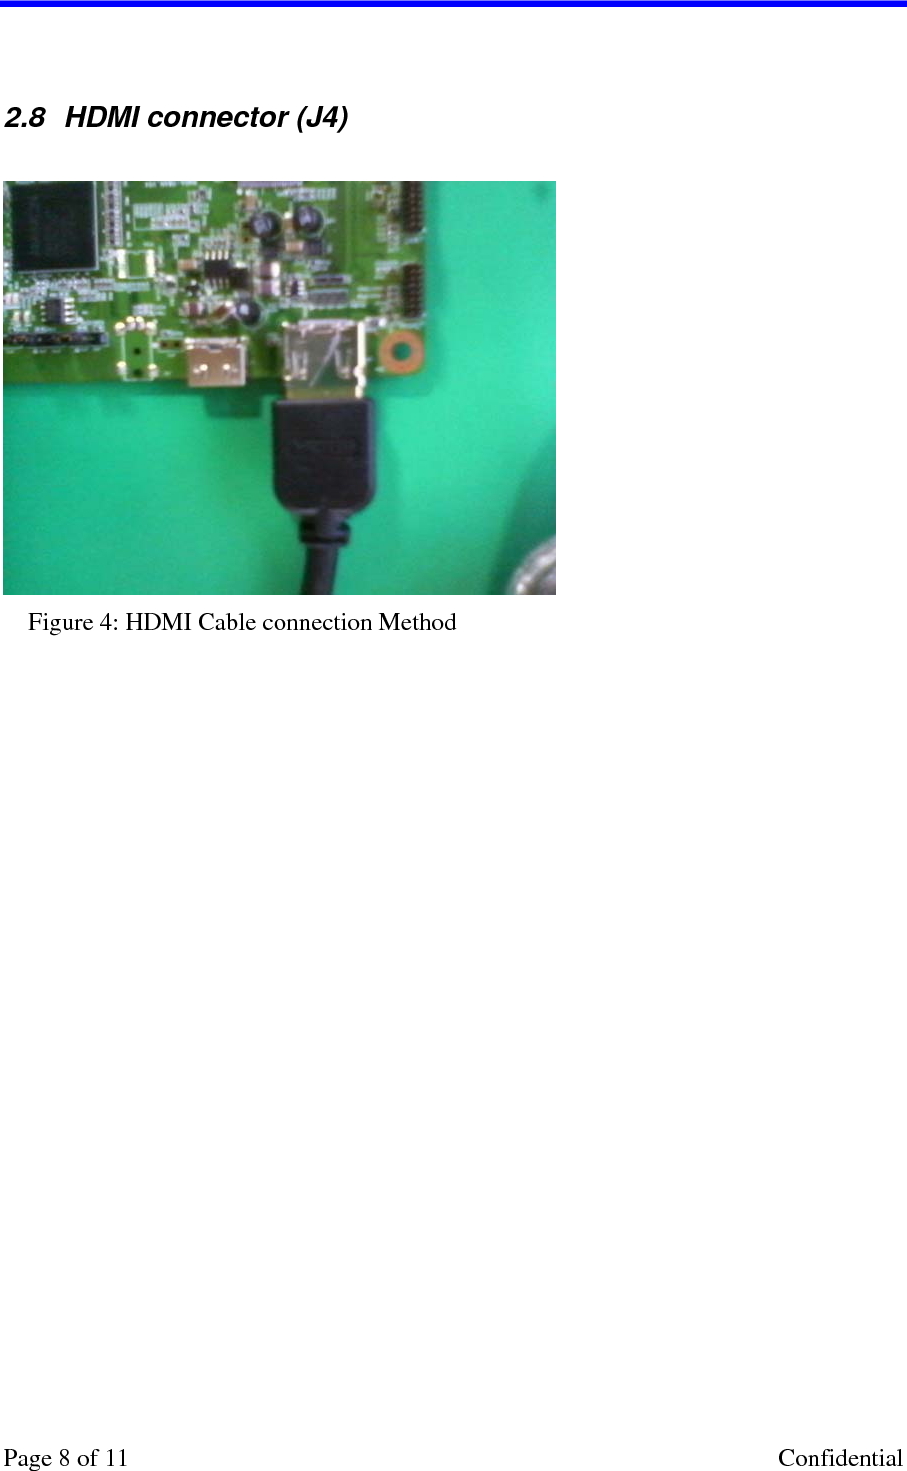     2.8  HDMI connector (J4)   Figure 4: HDMI Cable connection Method Page 8 of 11    Confidential 